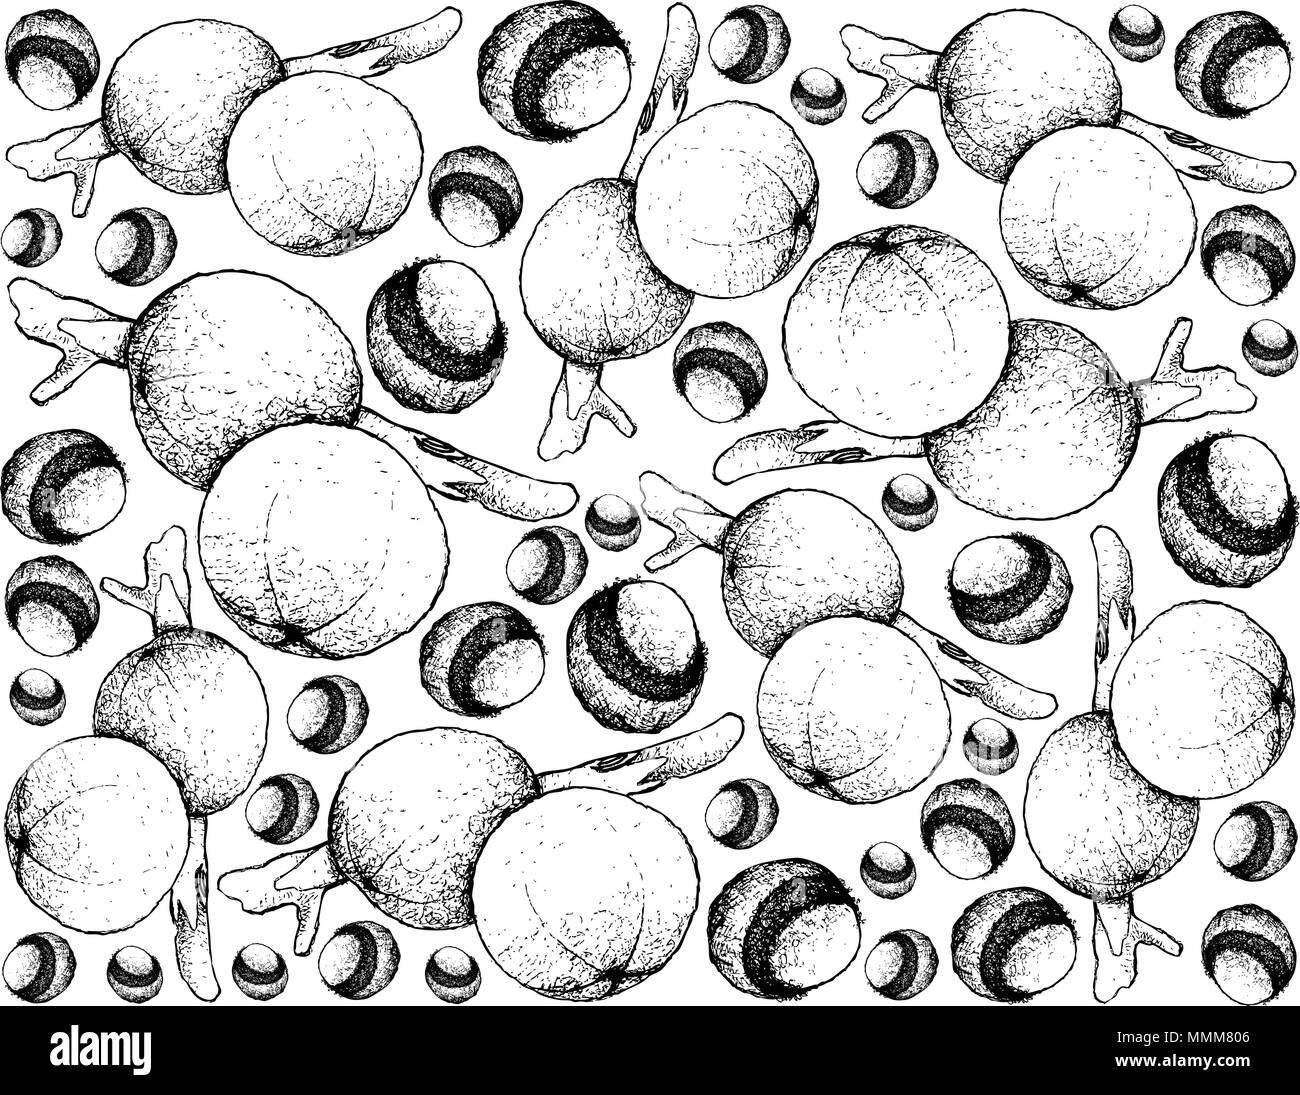 Tropical Fruits, Illustration Wallpaper of Hand Drawn Sketch Cambuca or Plinia Edulis Fruits Isolated on White Background. Stock Vector